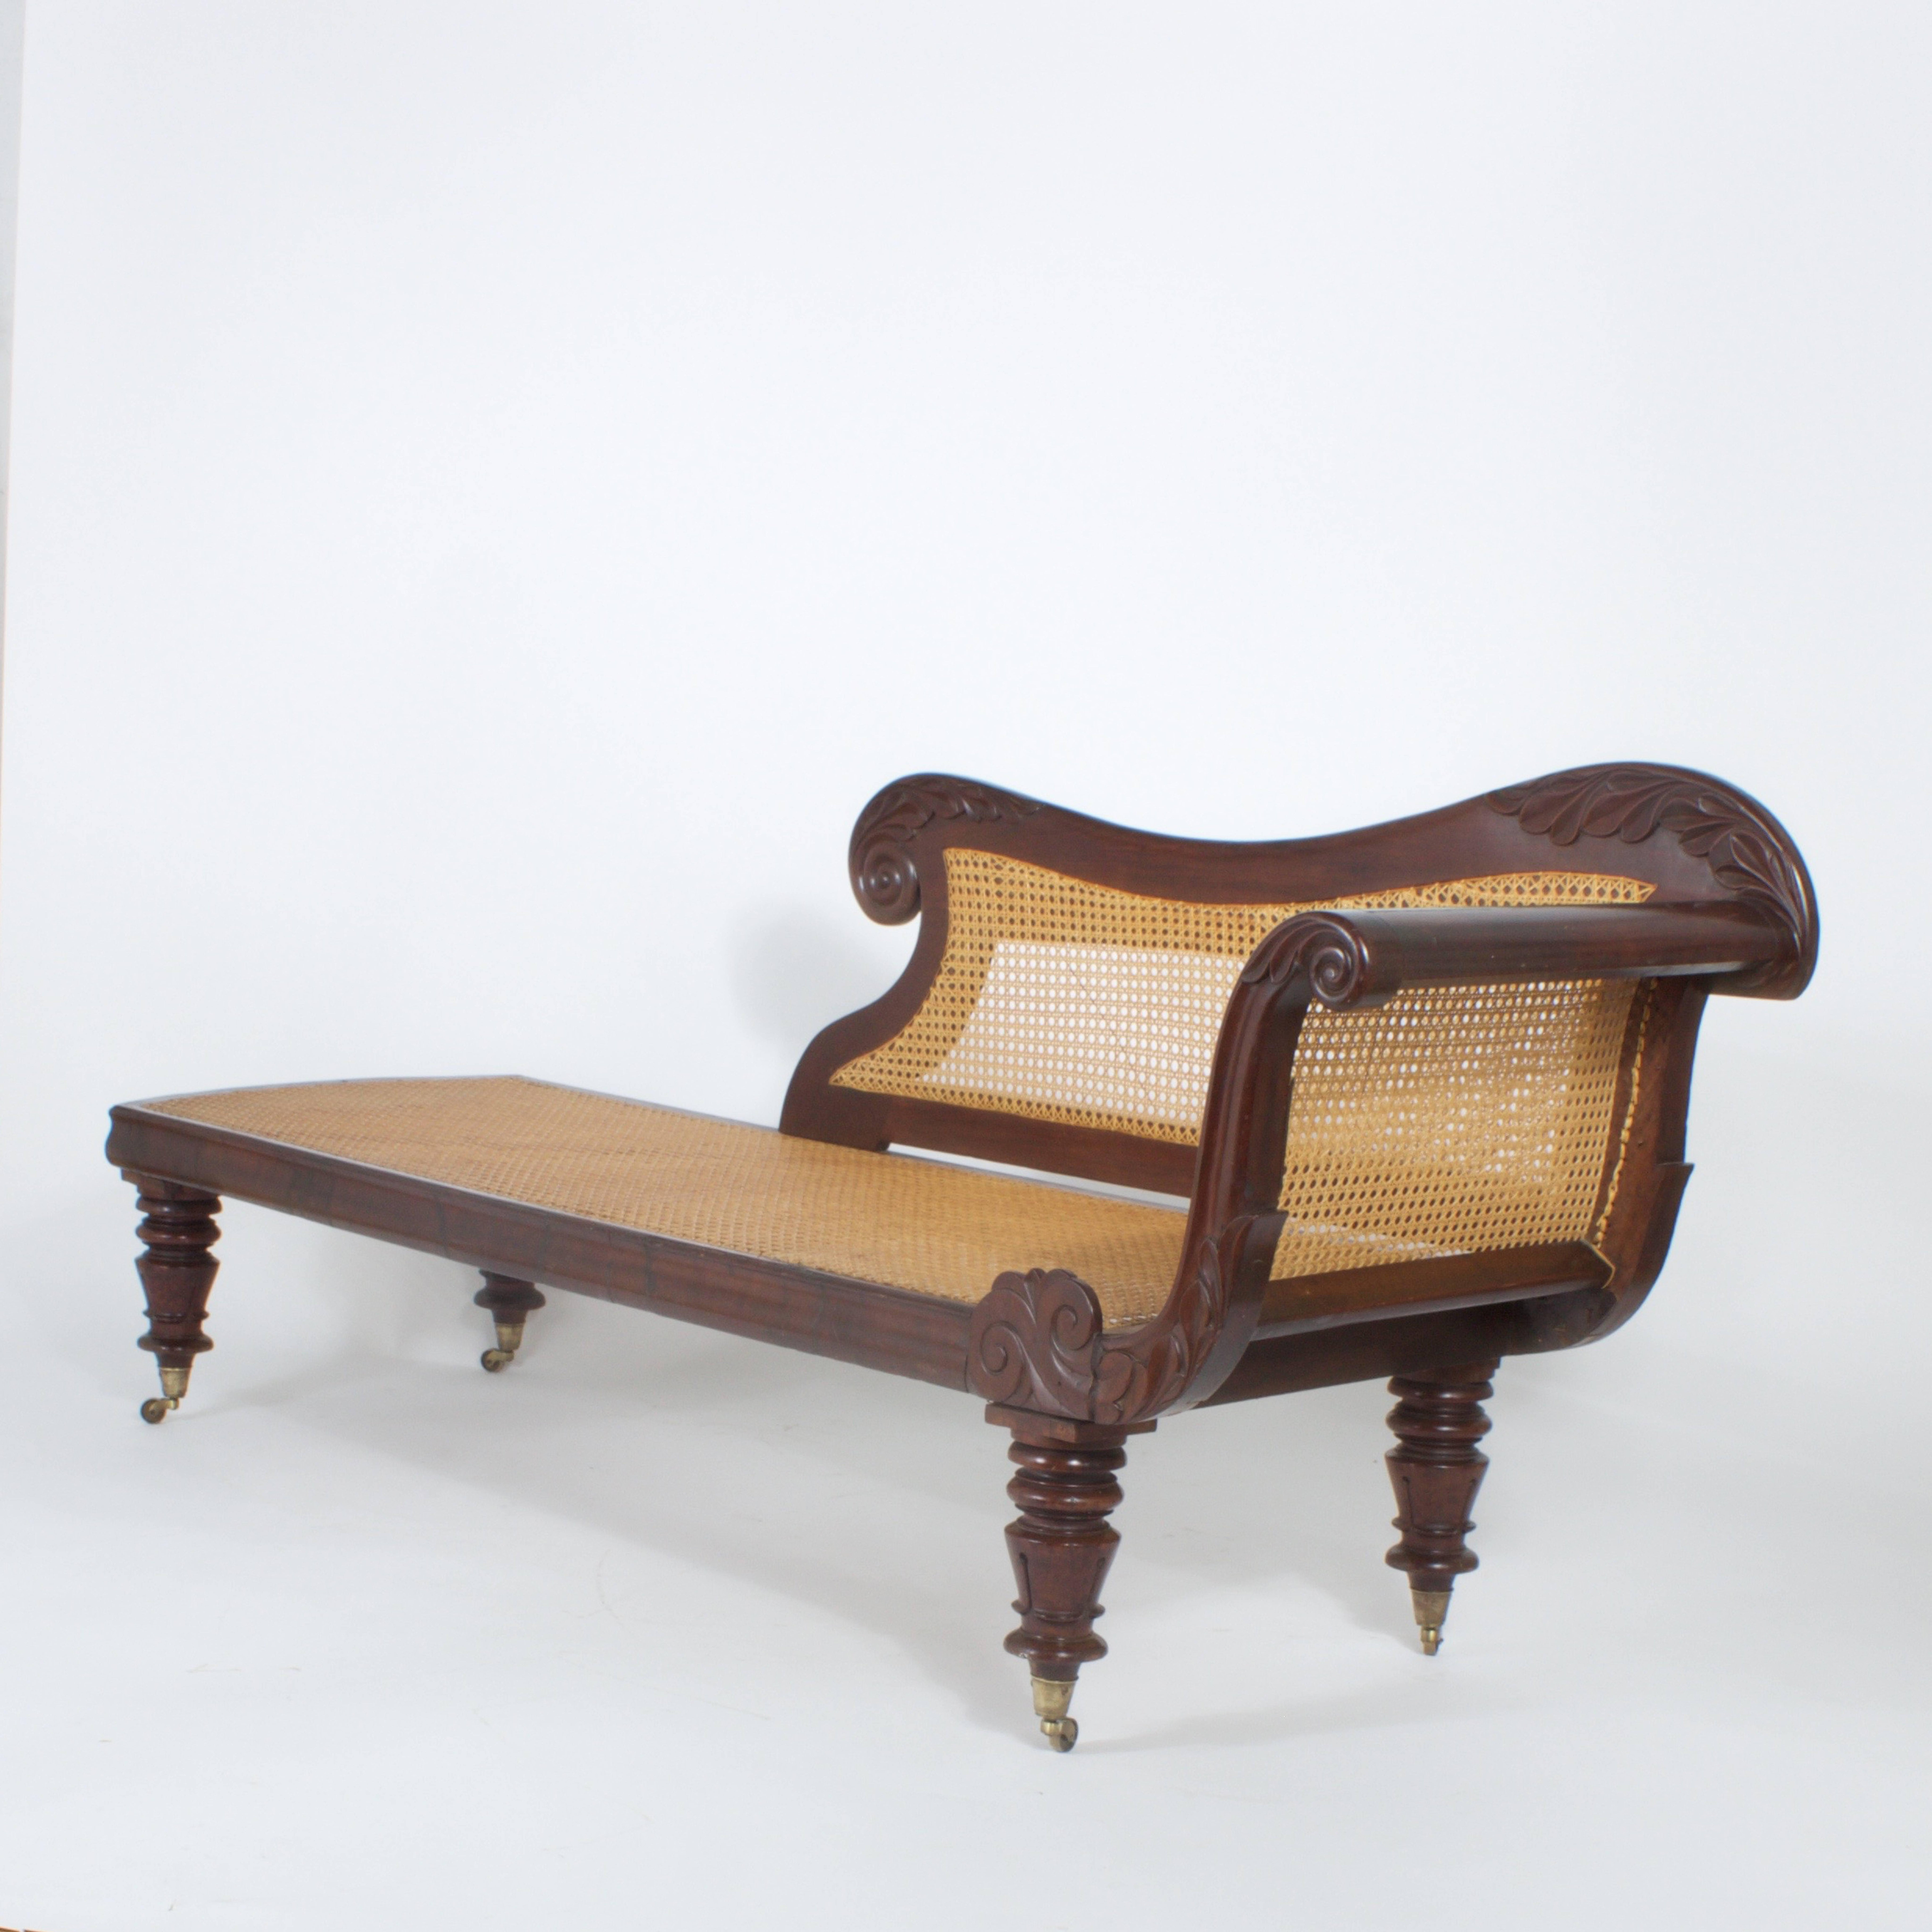 British Colonial West Indies Caned Chaise Lounge or Longue, Pair a Possibility